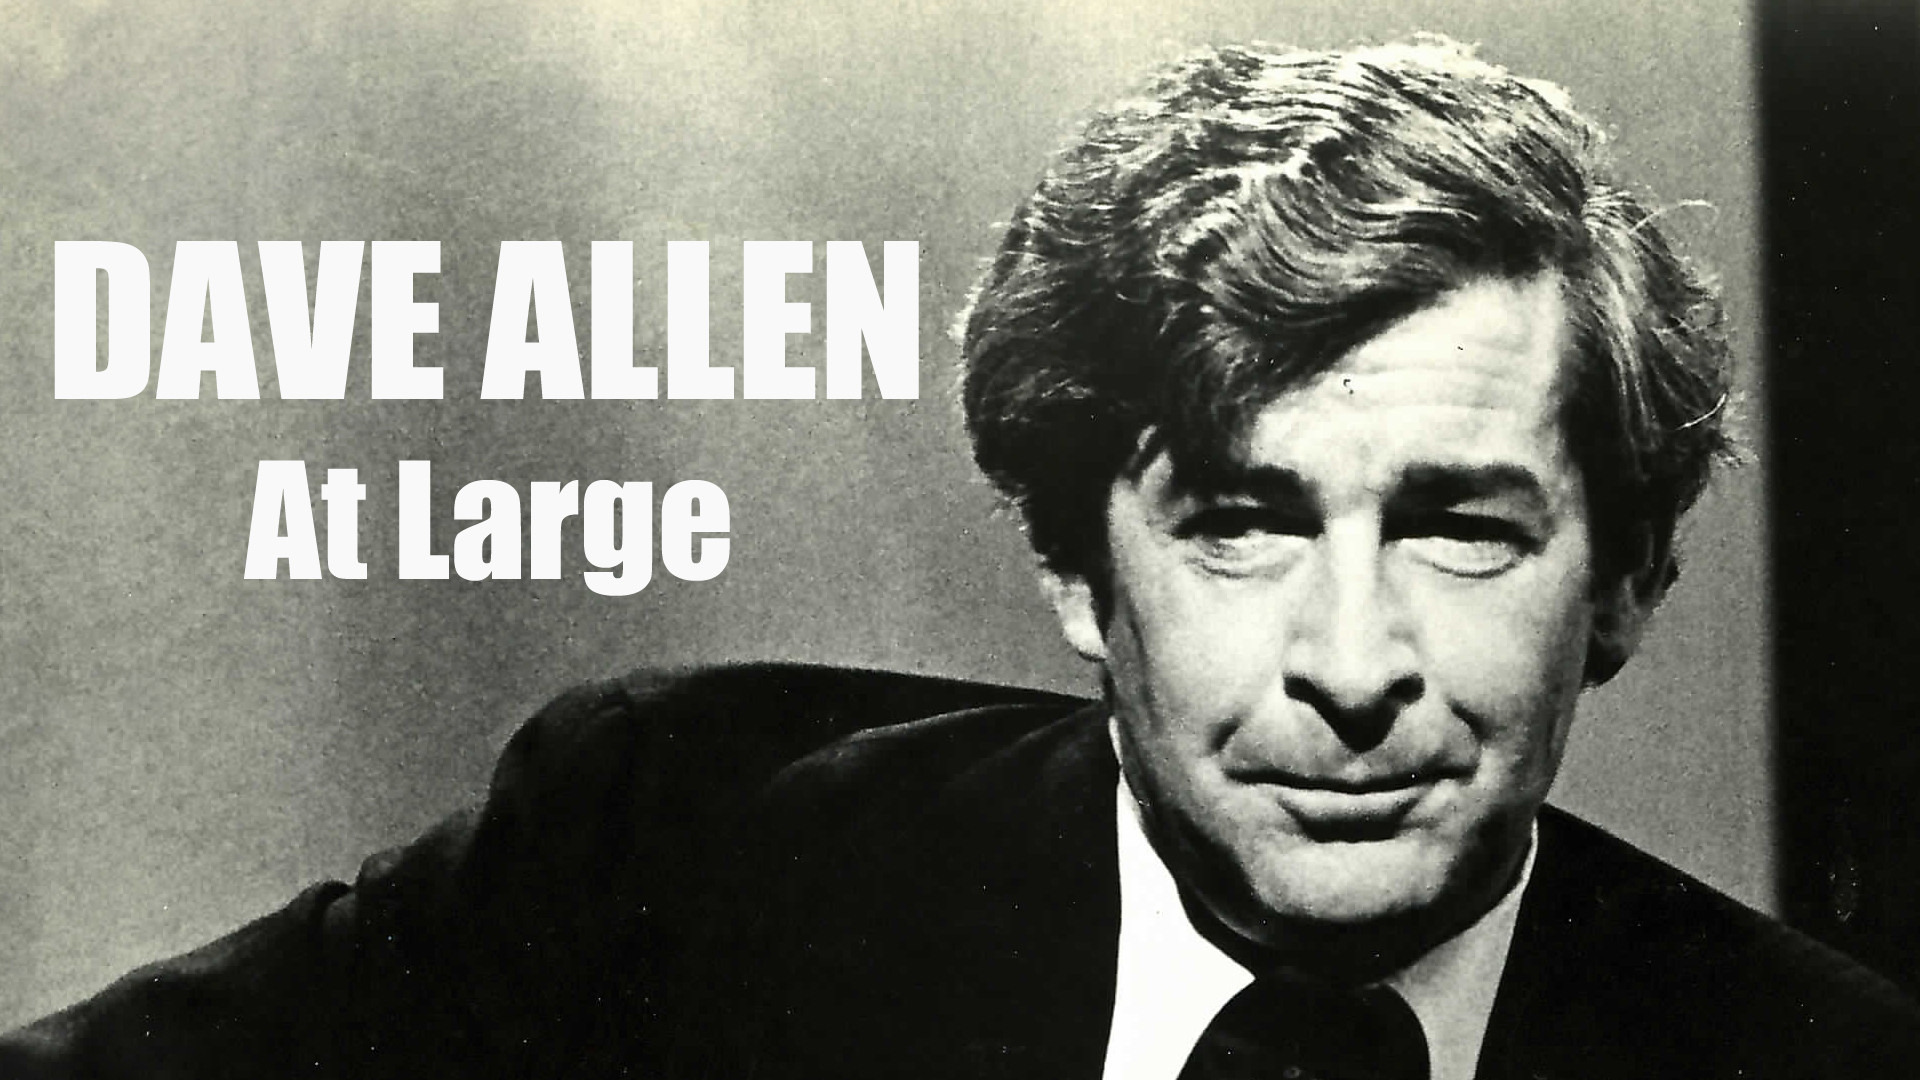 Show Dave Allen at Large